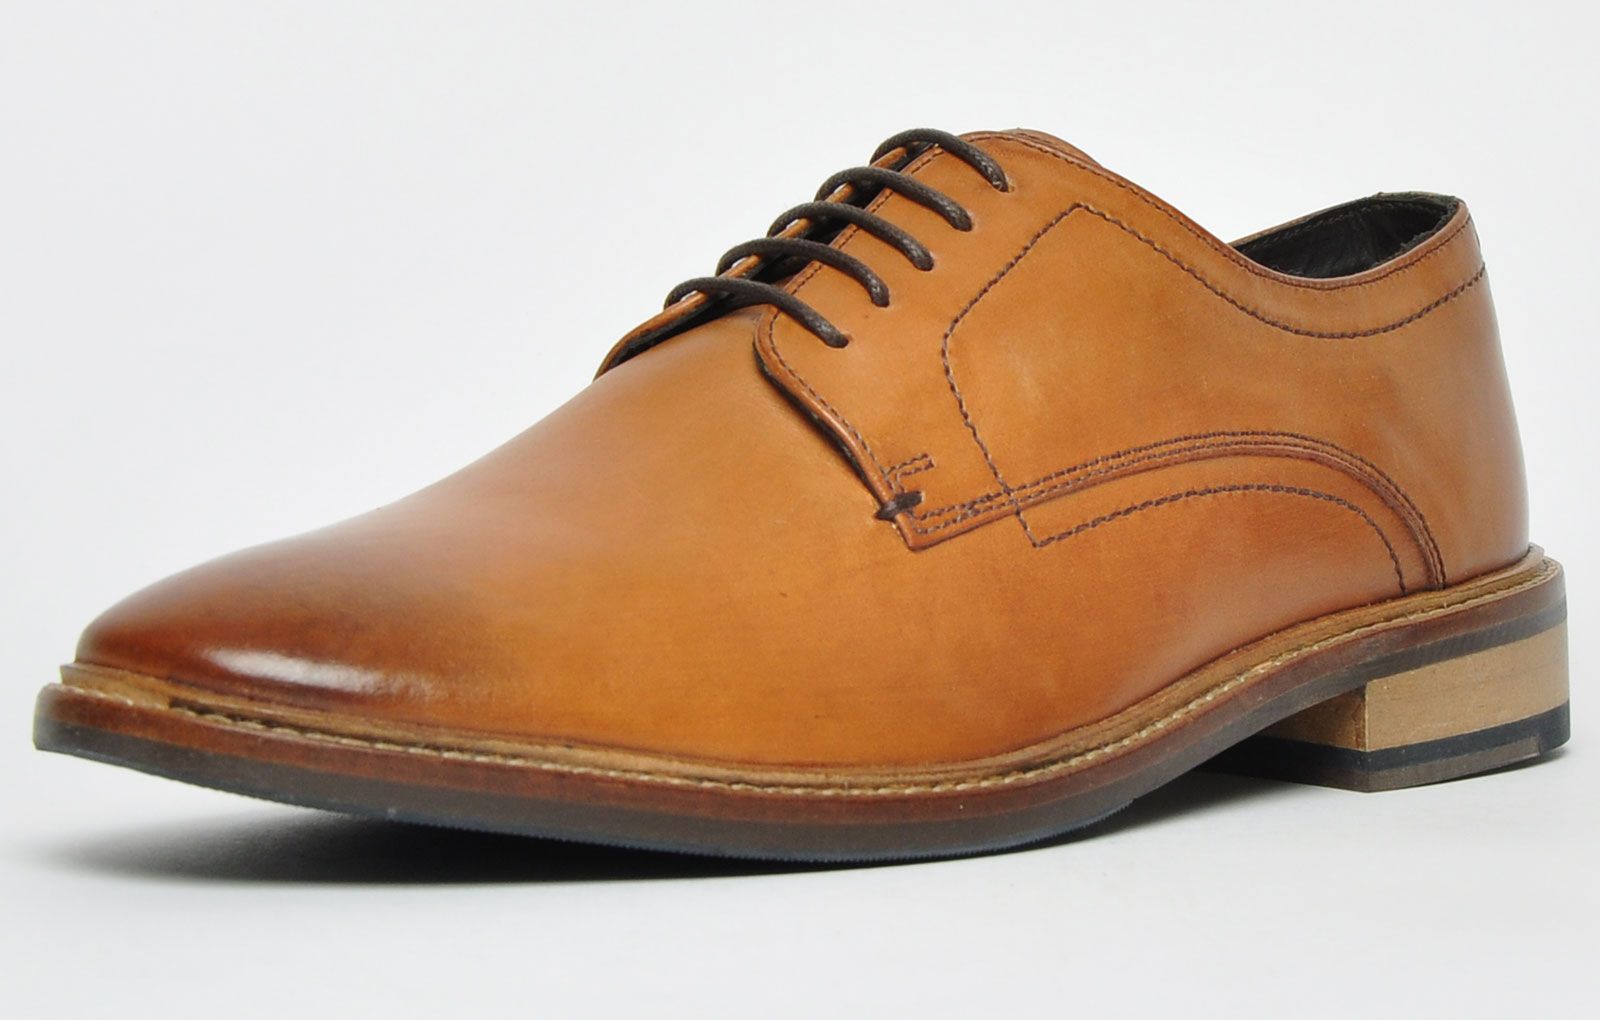 Crafted from quality soft leather in a well sought-after tan colourway, the Conrad has a smooth finish that would upgrade a smart look or add an elegant touch to any smart-casual outfit. <p>These Ikon Conrad men’s premium leather shoes feature a full lace up front, combined with a premium leather textile inner lining, providing a comfortable and secure fit throughout all wear. The durable outsole with stitch detailing provides fashionable retro styling making these Conrad shoes an absolute fashion must have.</p> <p style=